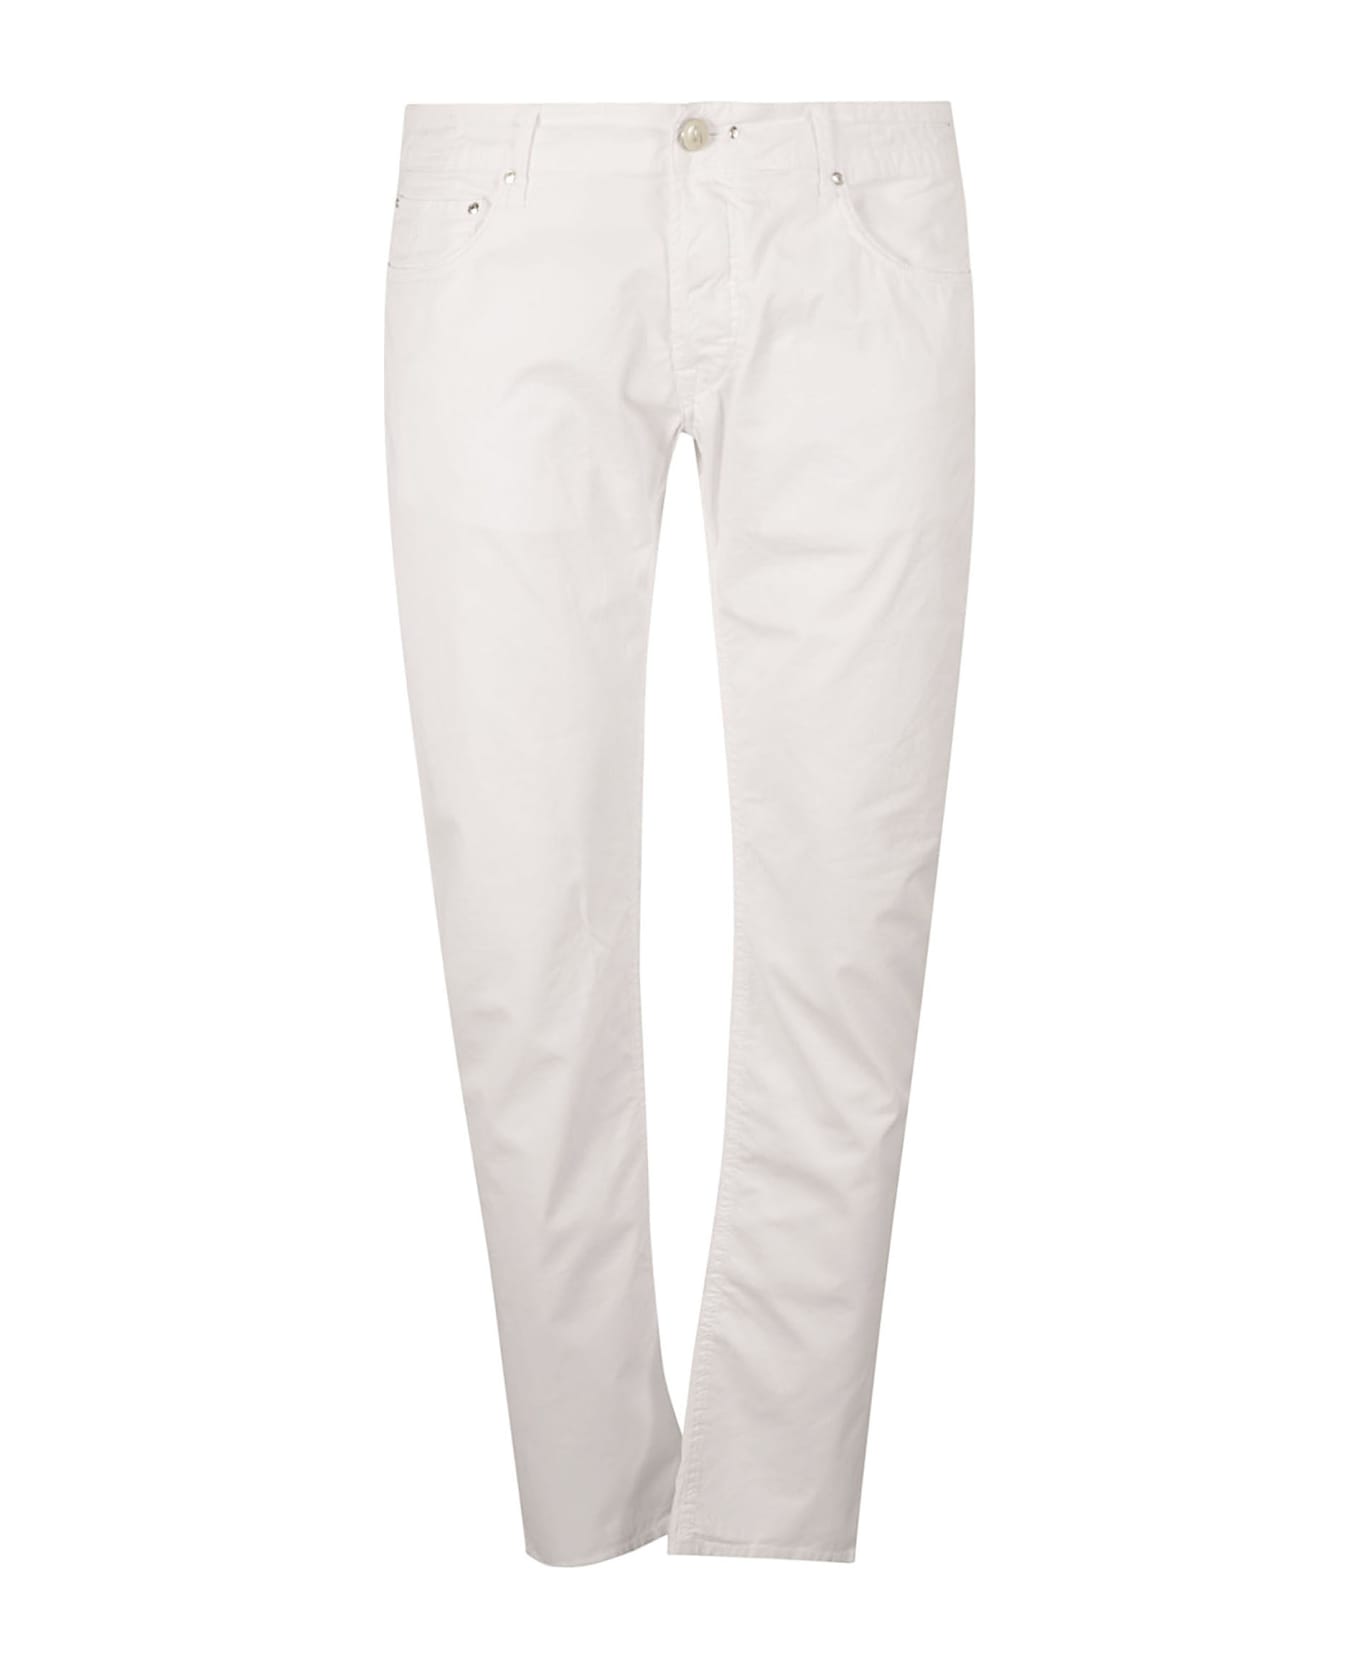 Hand Picked Orvietoc Jeans - White